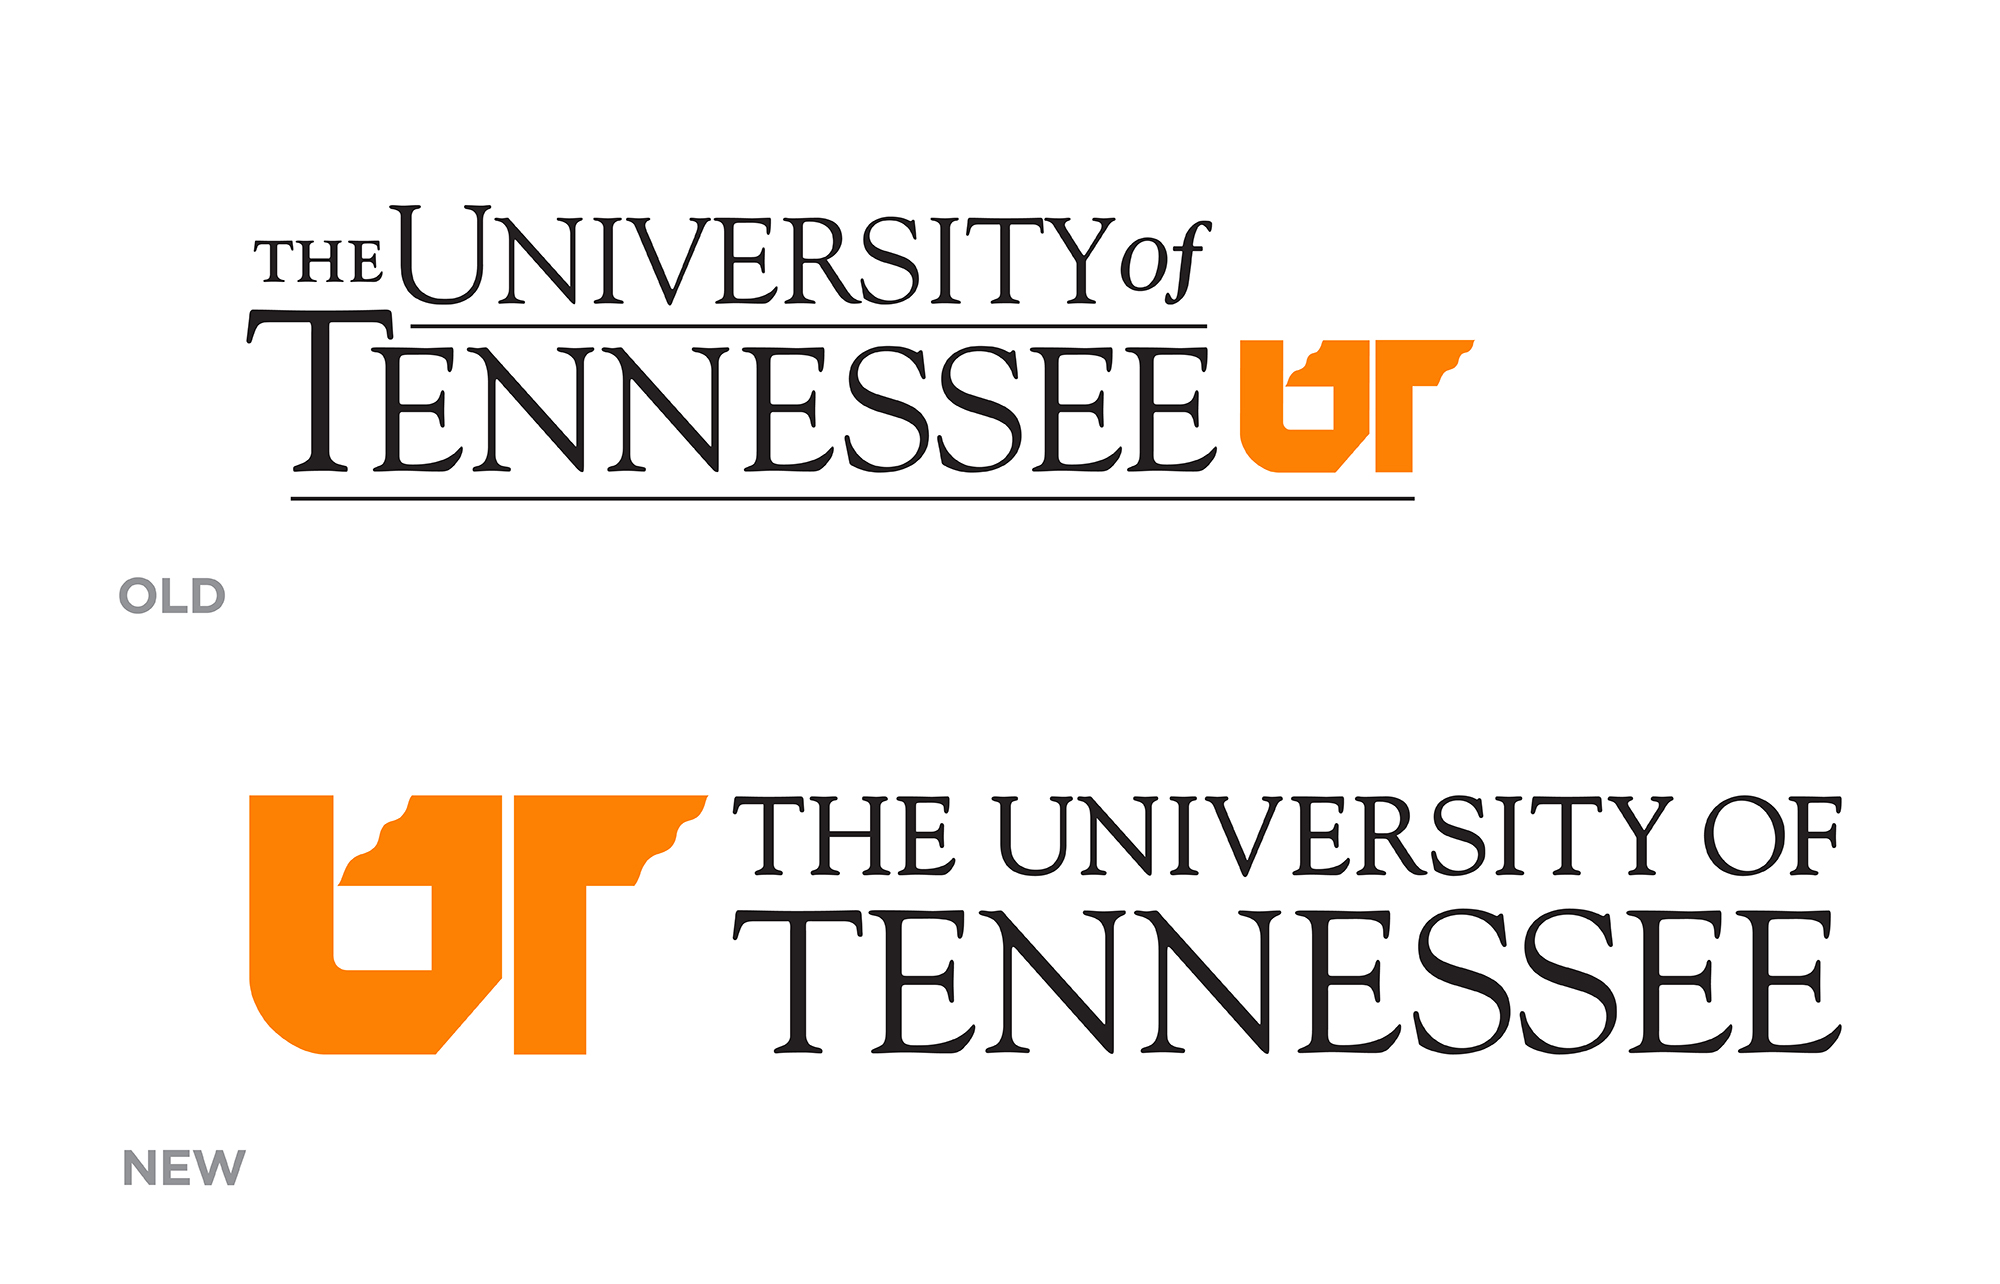 Previous and new UT system logos